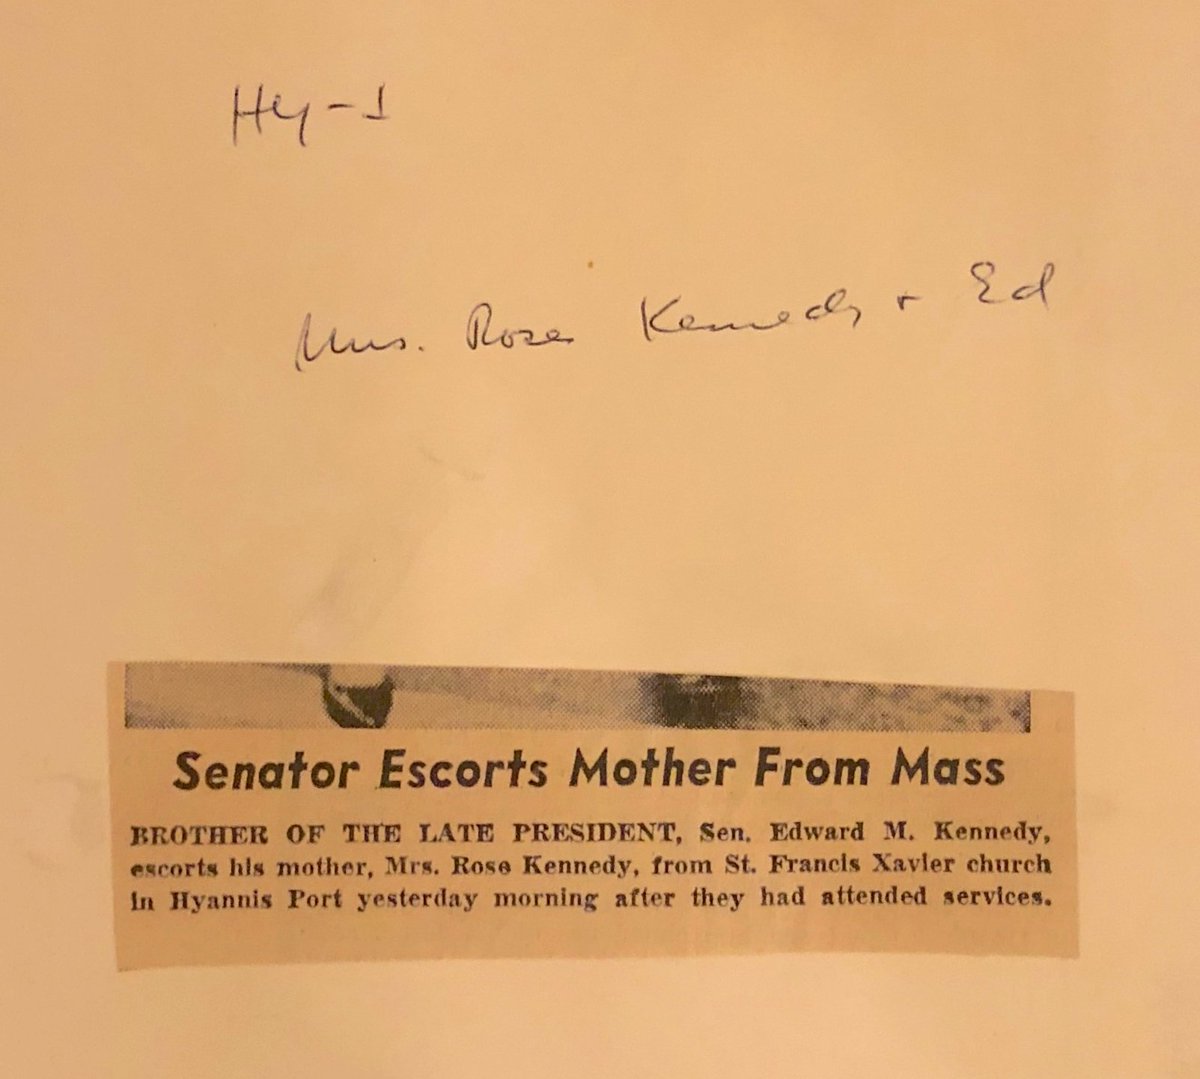 16/x But I can at least recognize the photographer — Bob Howard — whose name didn't even make it onto the hand-written metadata on the back of the print 56 years ago yesterday (unless it's the coded squiggles that look like "Hey-1"?):